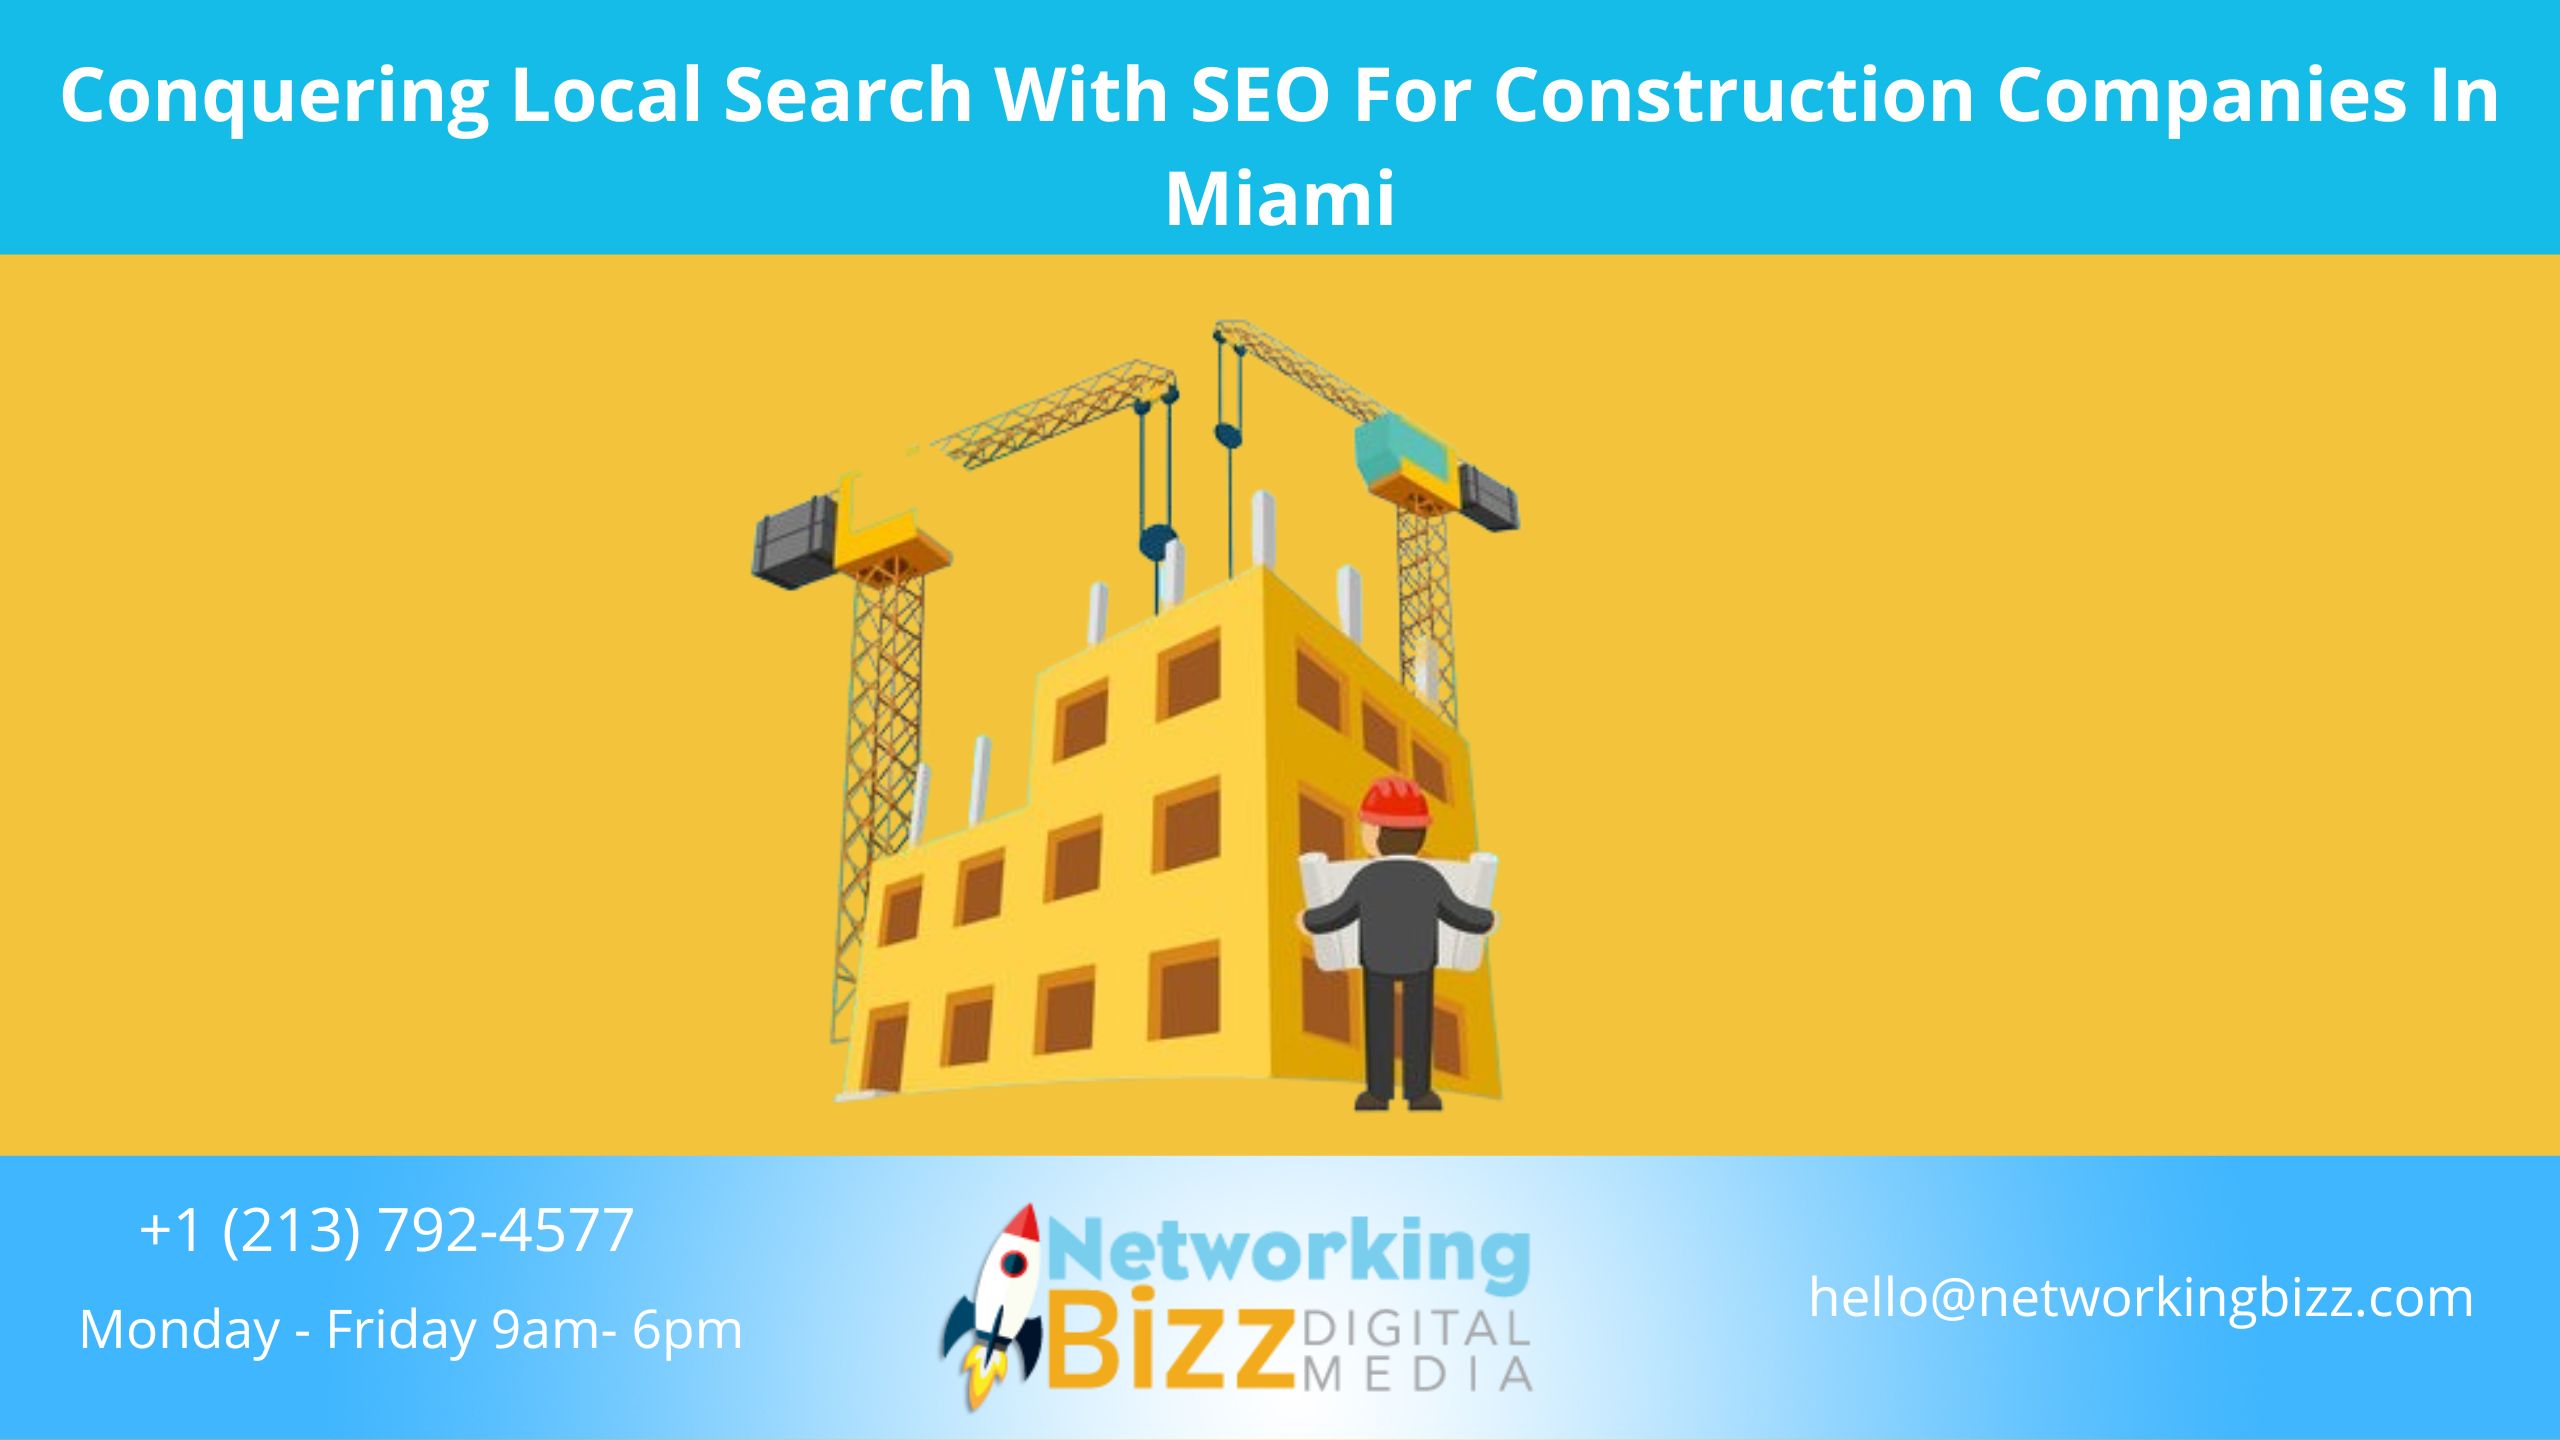 Conquering Local Search With SEO For Construction Companies In Miami